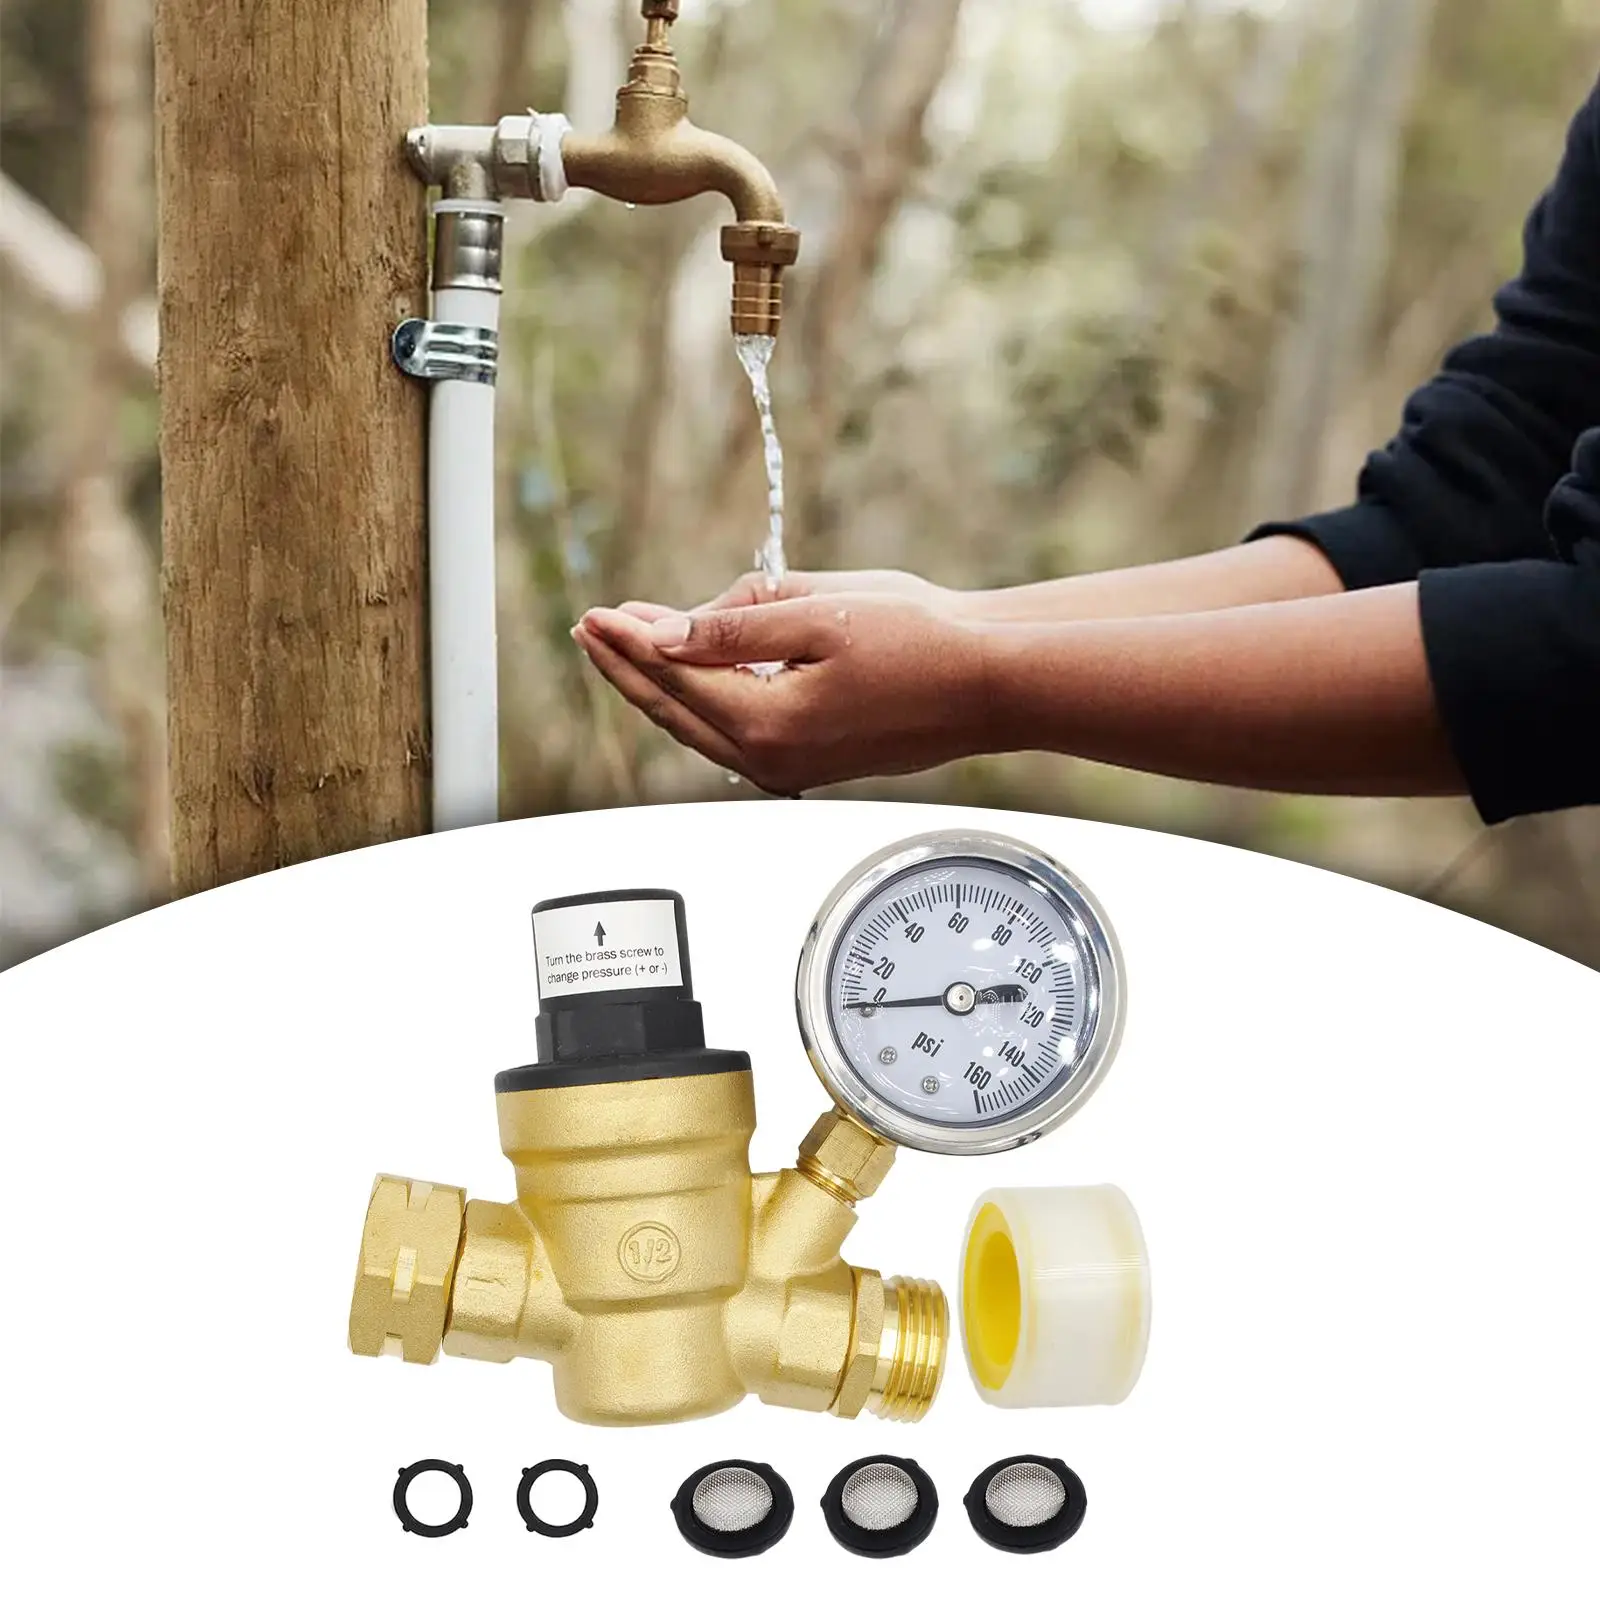 Water Pressure Valve Easy Connection to Faucet 3/4in Plumbing System RV with Gauge 160PSI Garden Water Pressure Reducing Valve